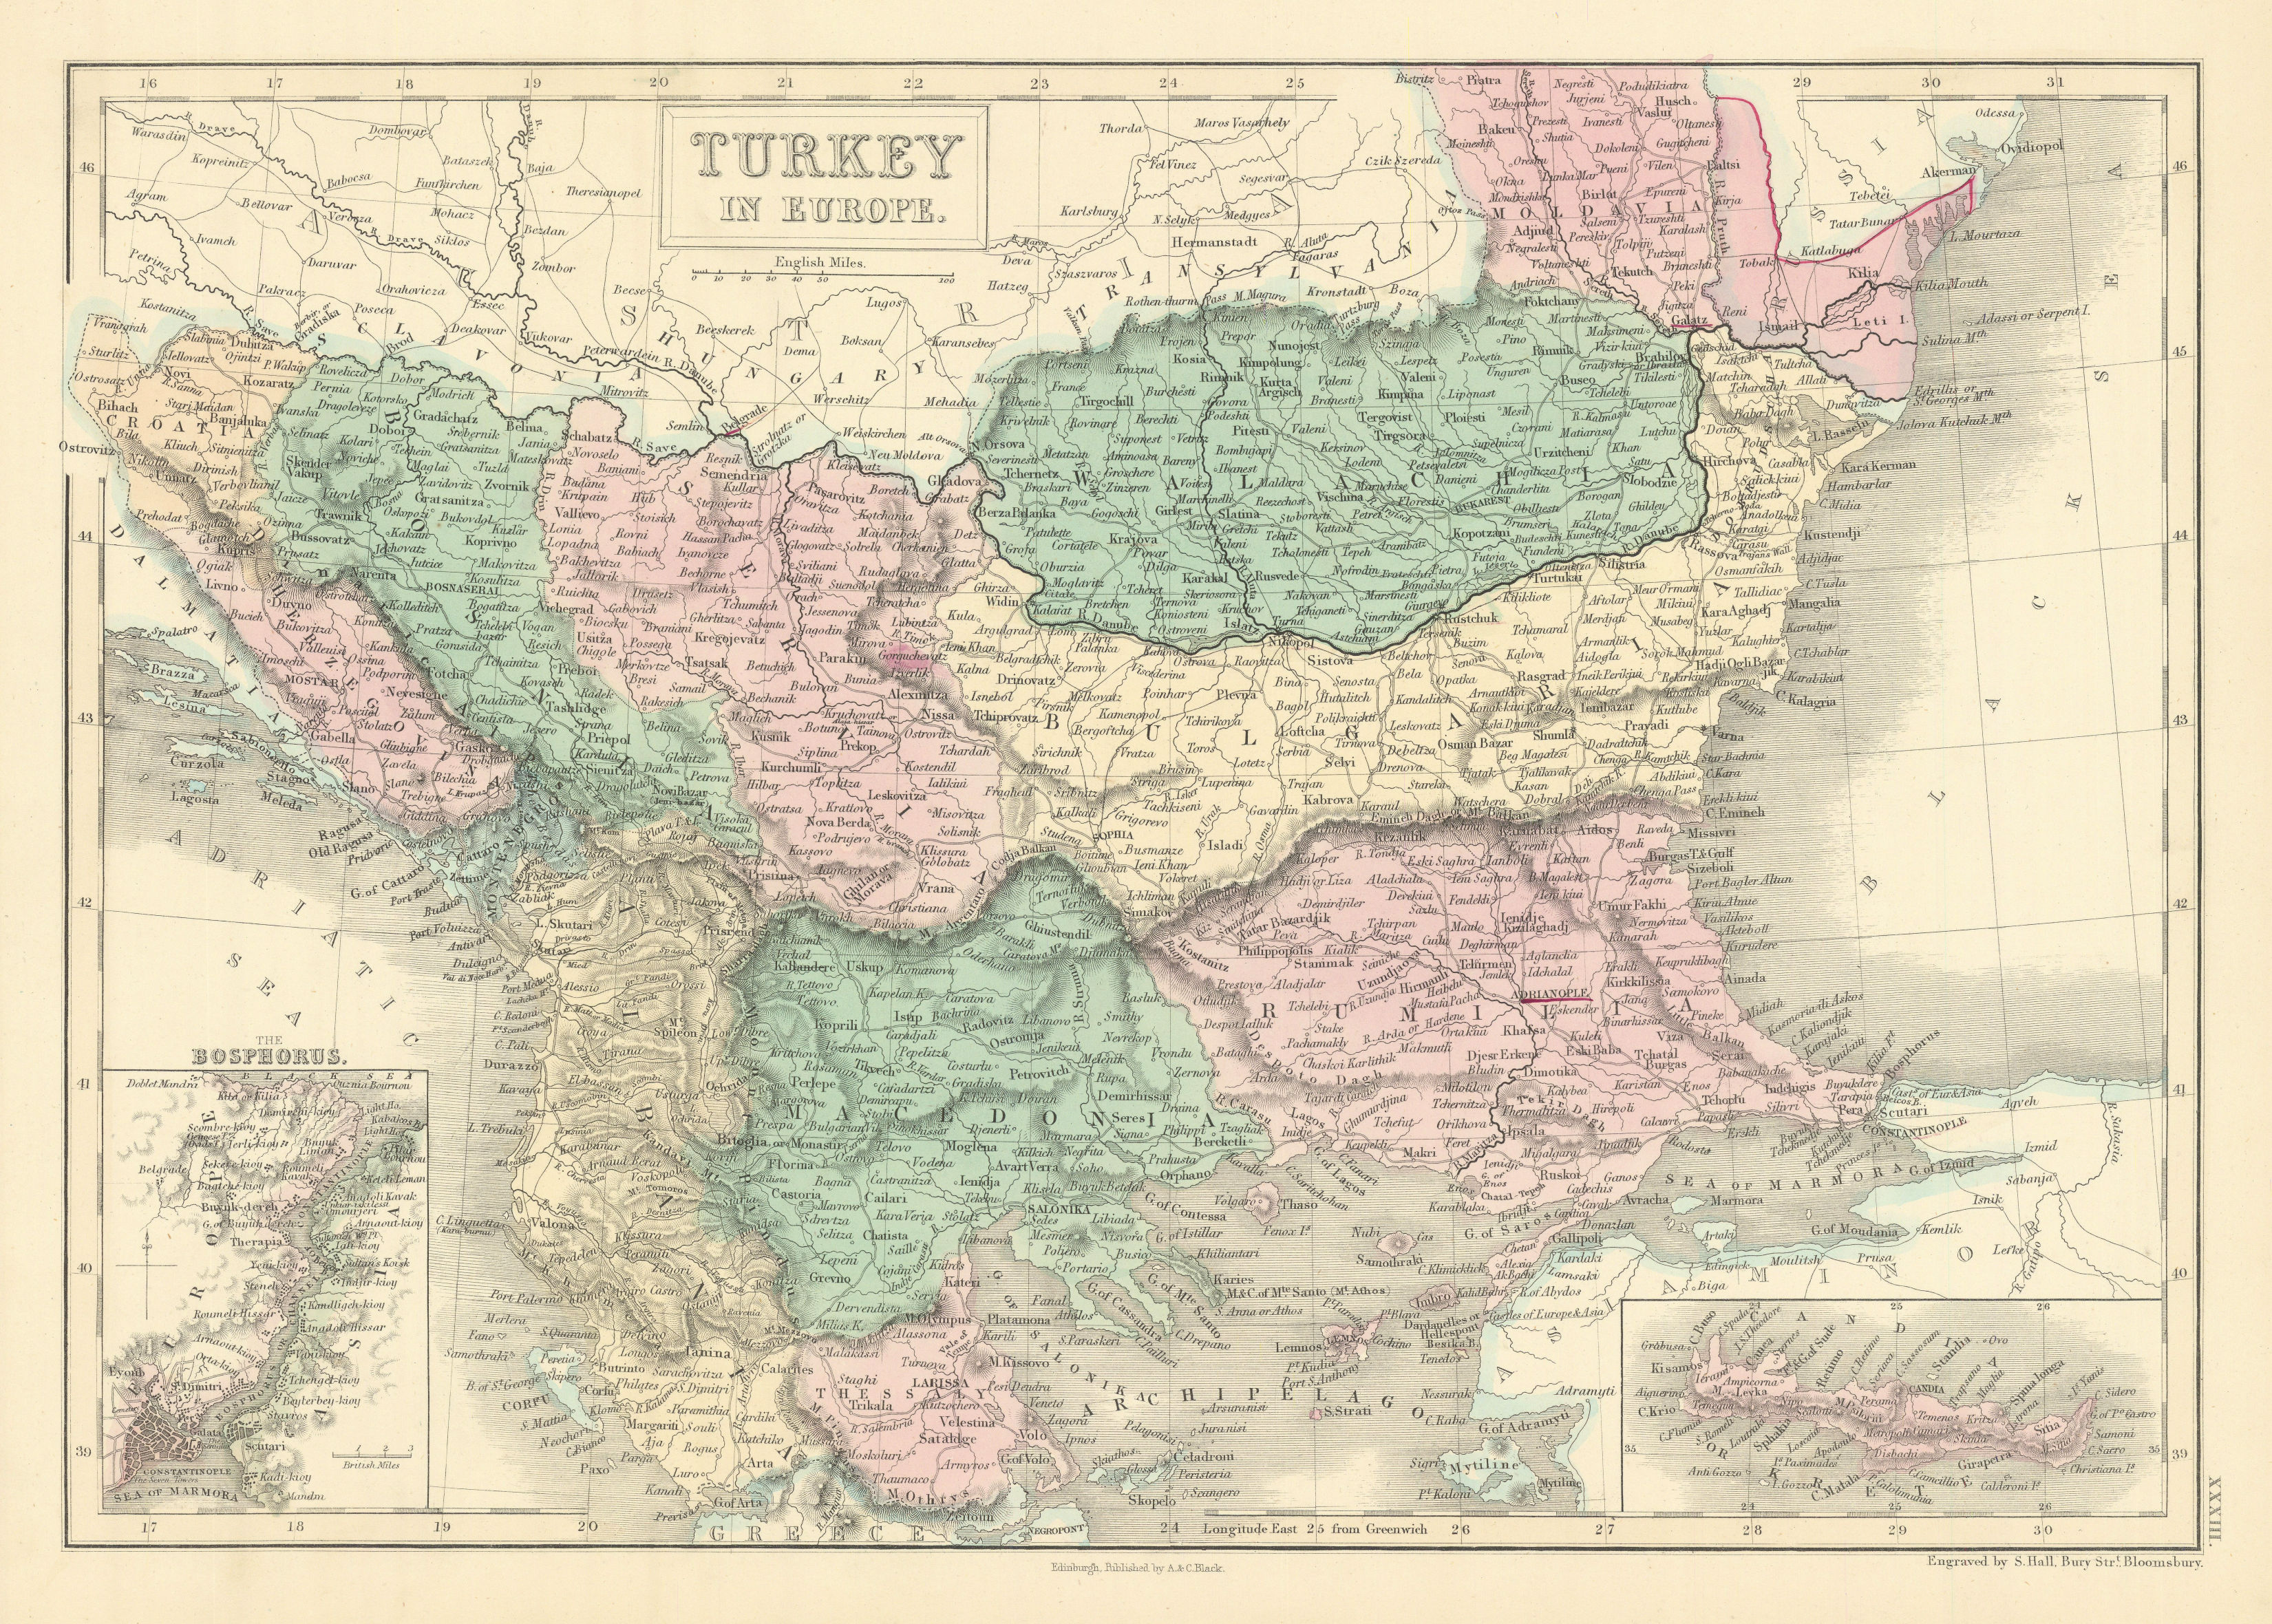 Associate Product Turkey in Europe. Inset The Bosphorus. Balkans. SIDNEY HALL 1856 old map